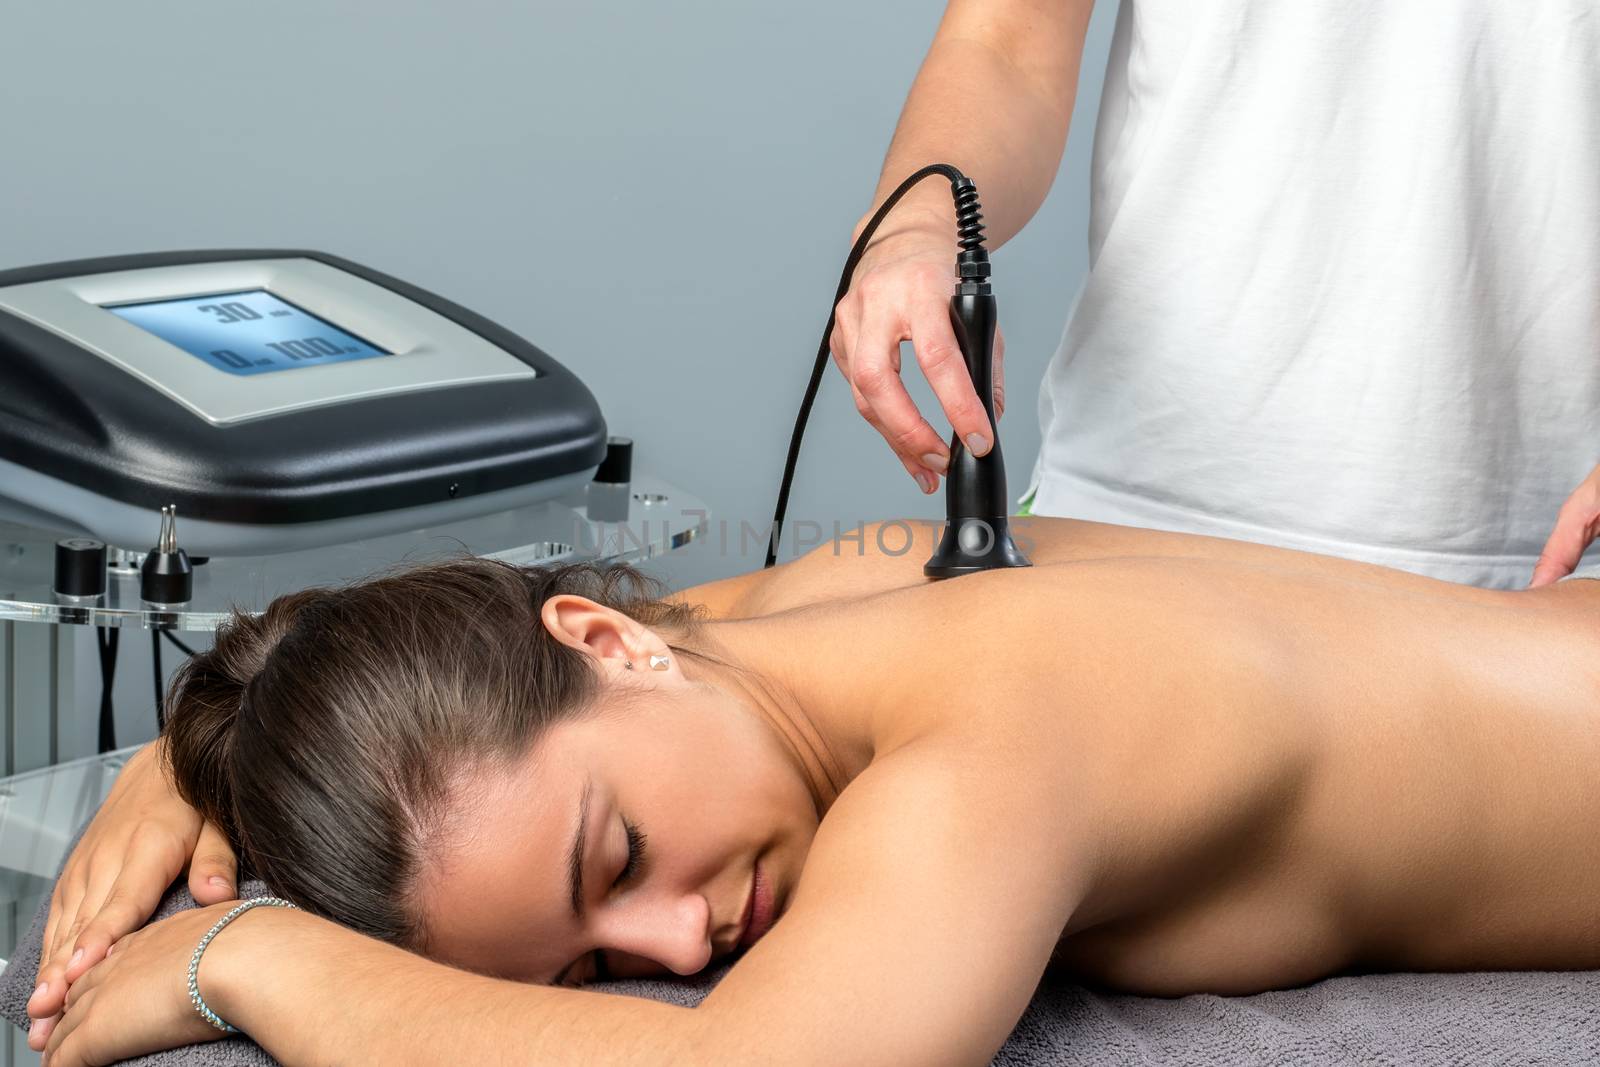 Close up of young woman receiving interferential electrotherapy.Therapist stimulating nerve on spine with apparatus.